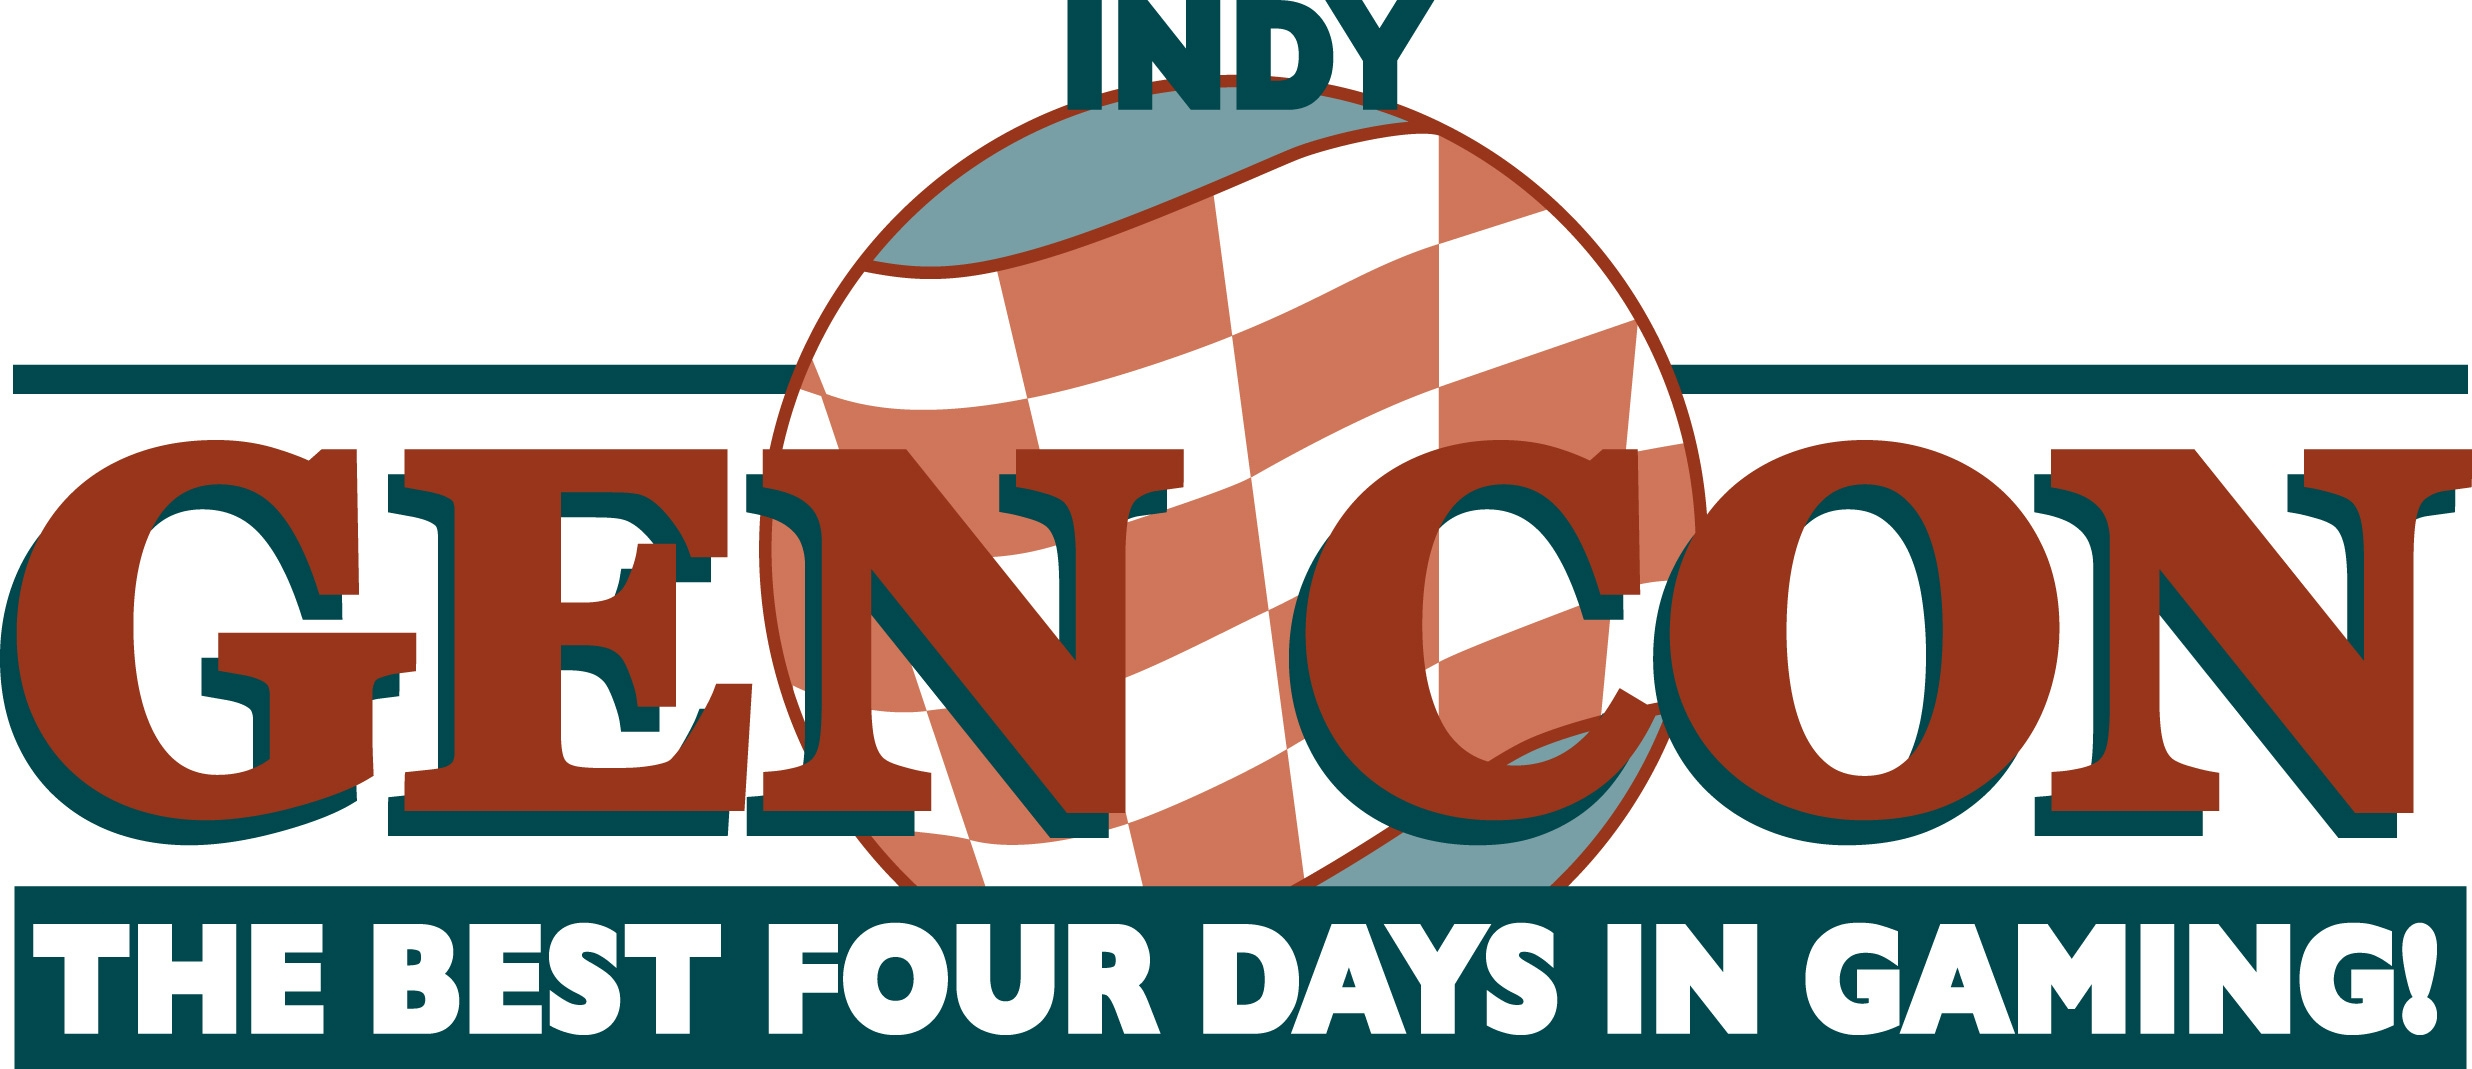 Indiana 'Religious Freedom' Bill Passes Gen Con Moving | The Mary Sue